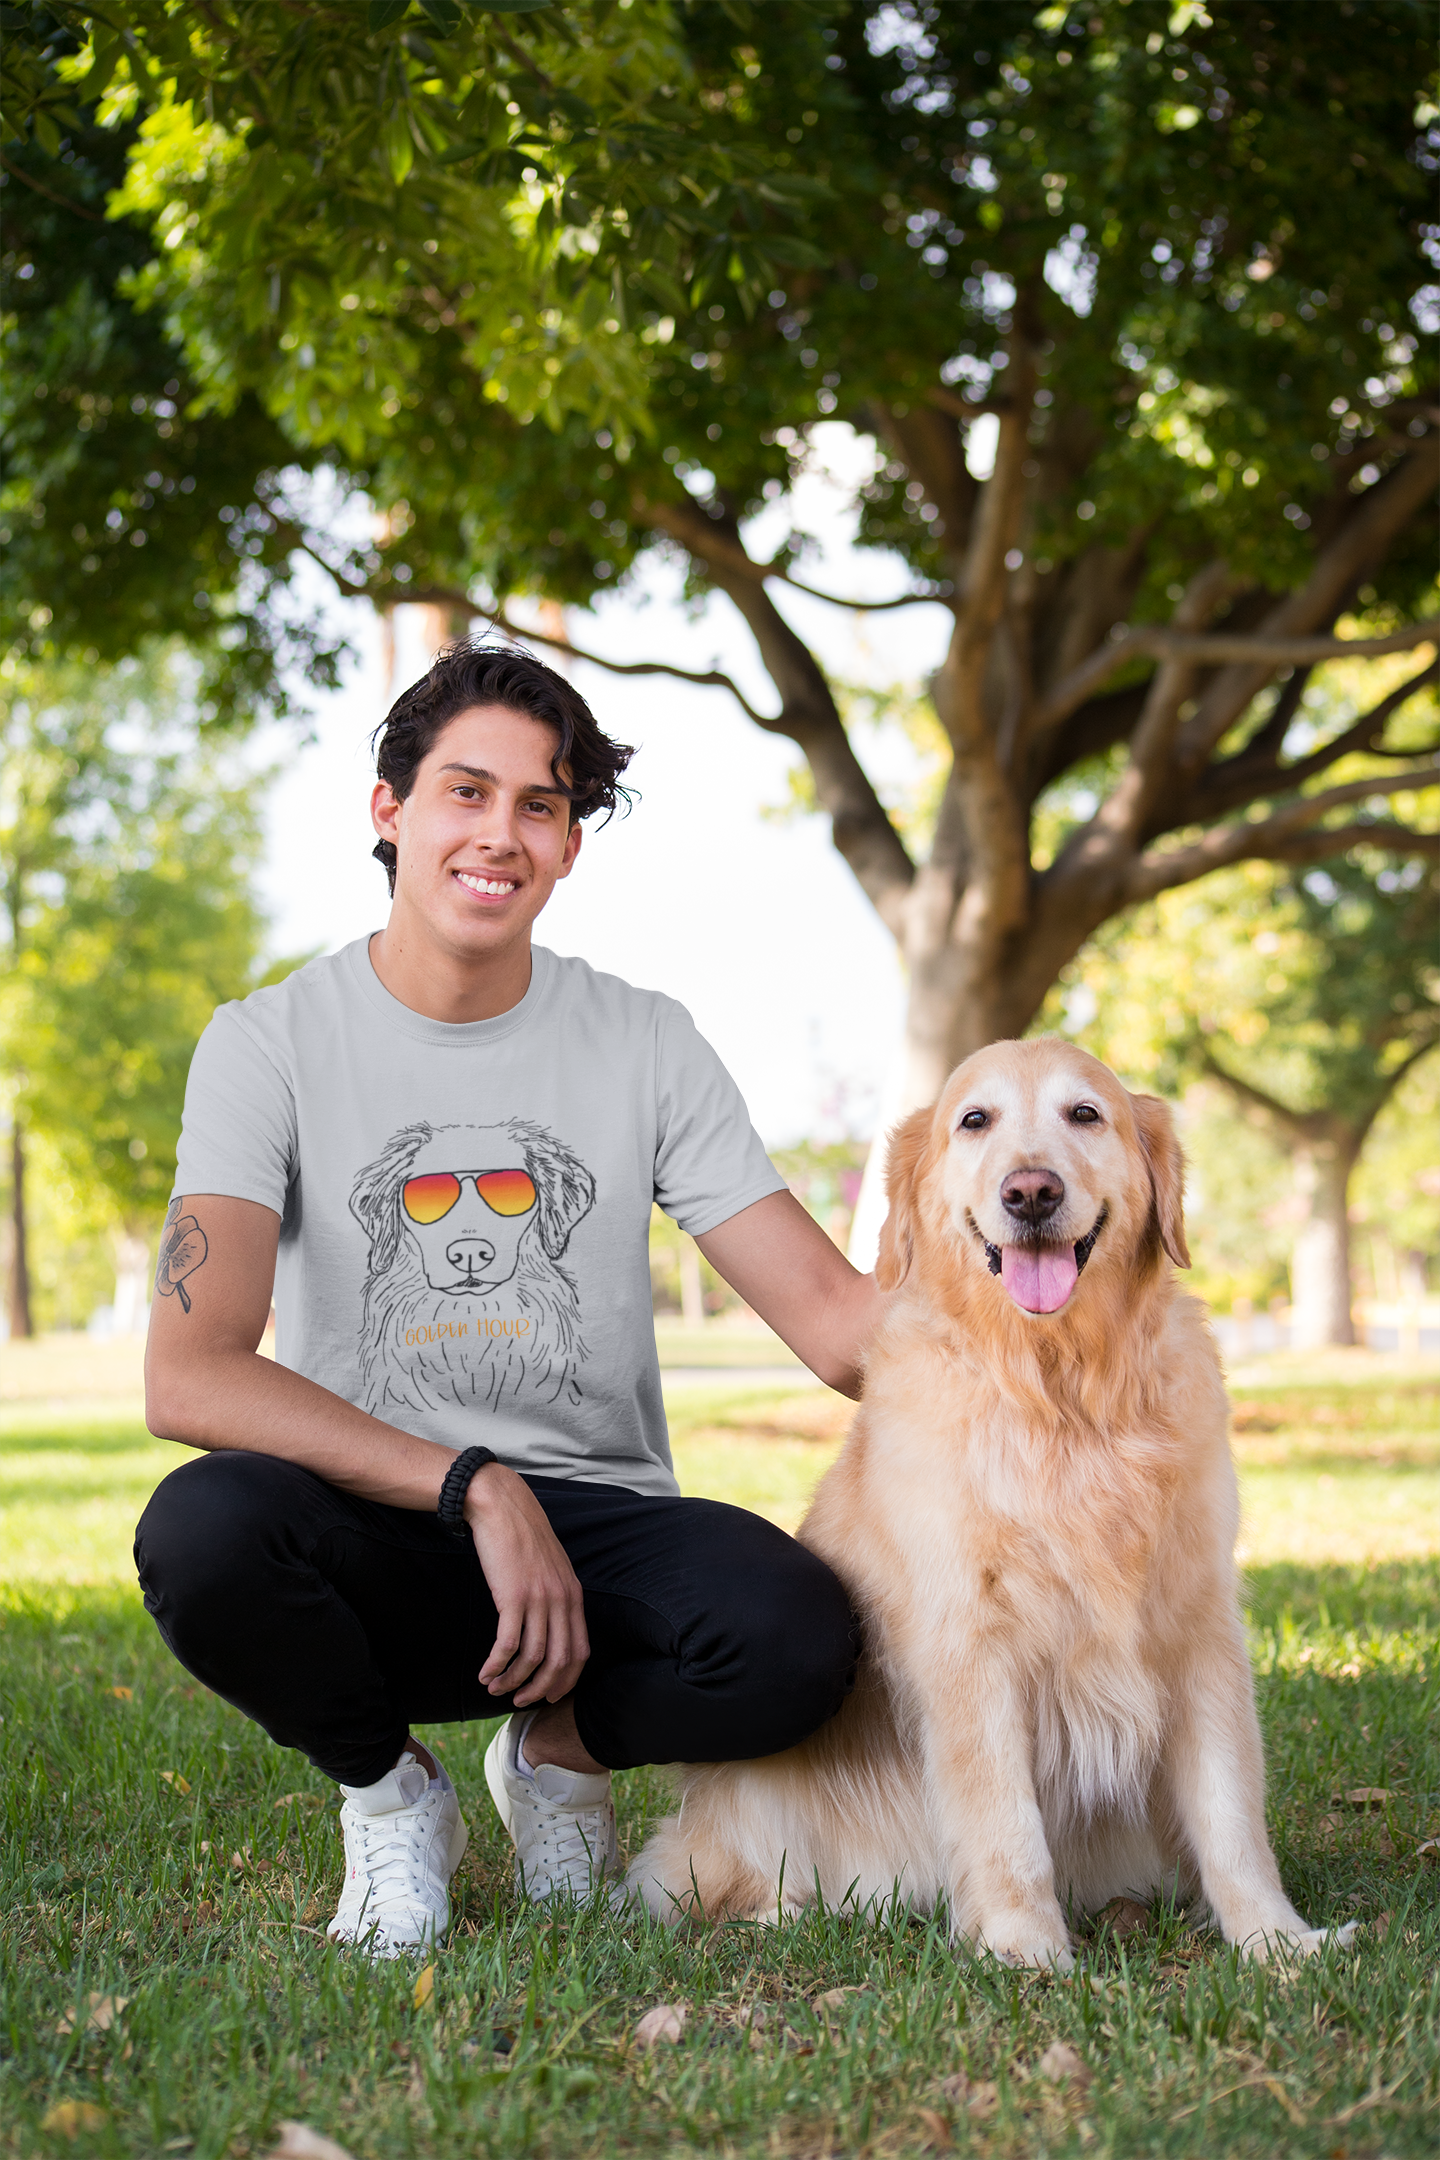 Happy Golden Hour! This cotton t-shirt is perfect for trying to catch that golden lighting with your golden retriever! Perfect gift for that golden lover in your life.